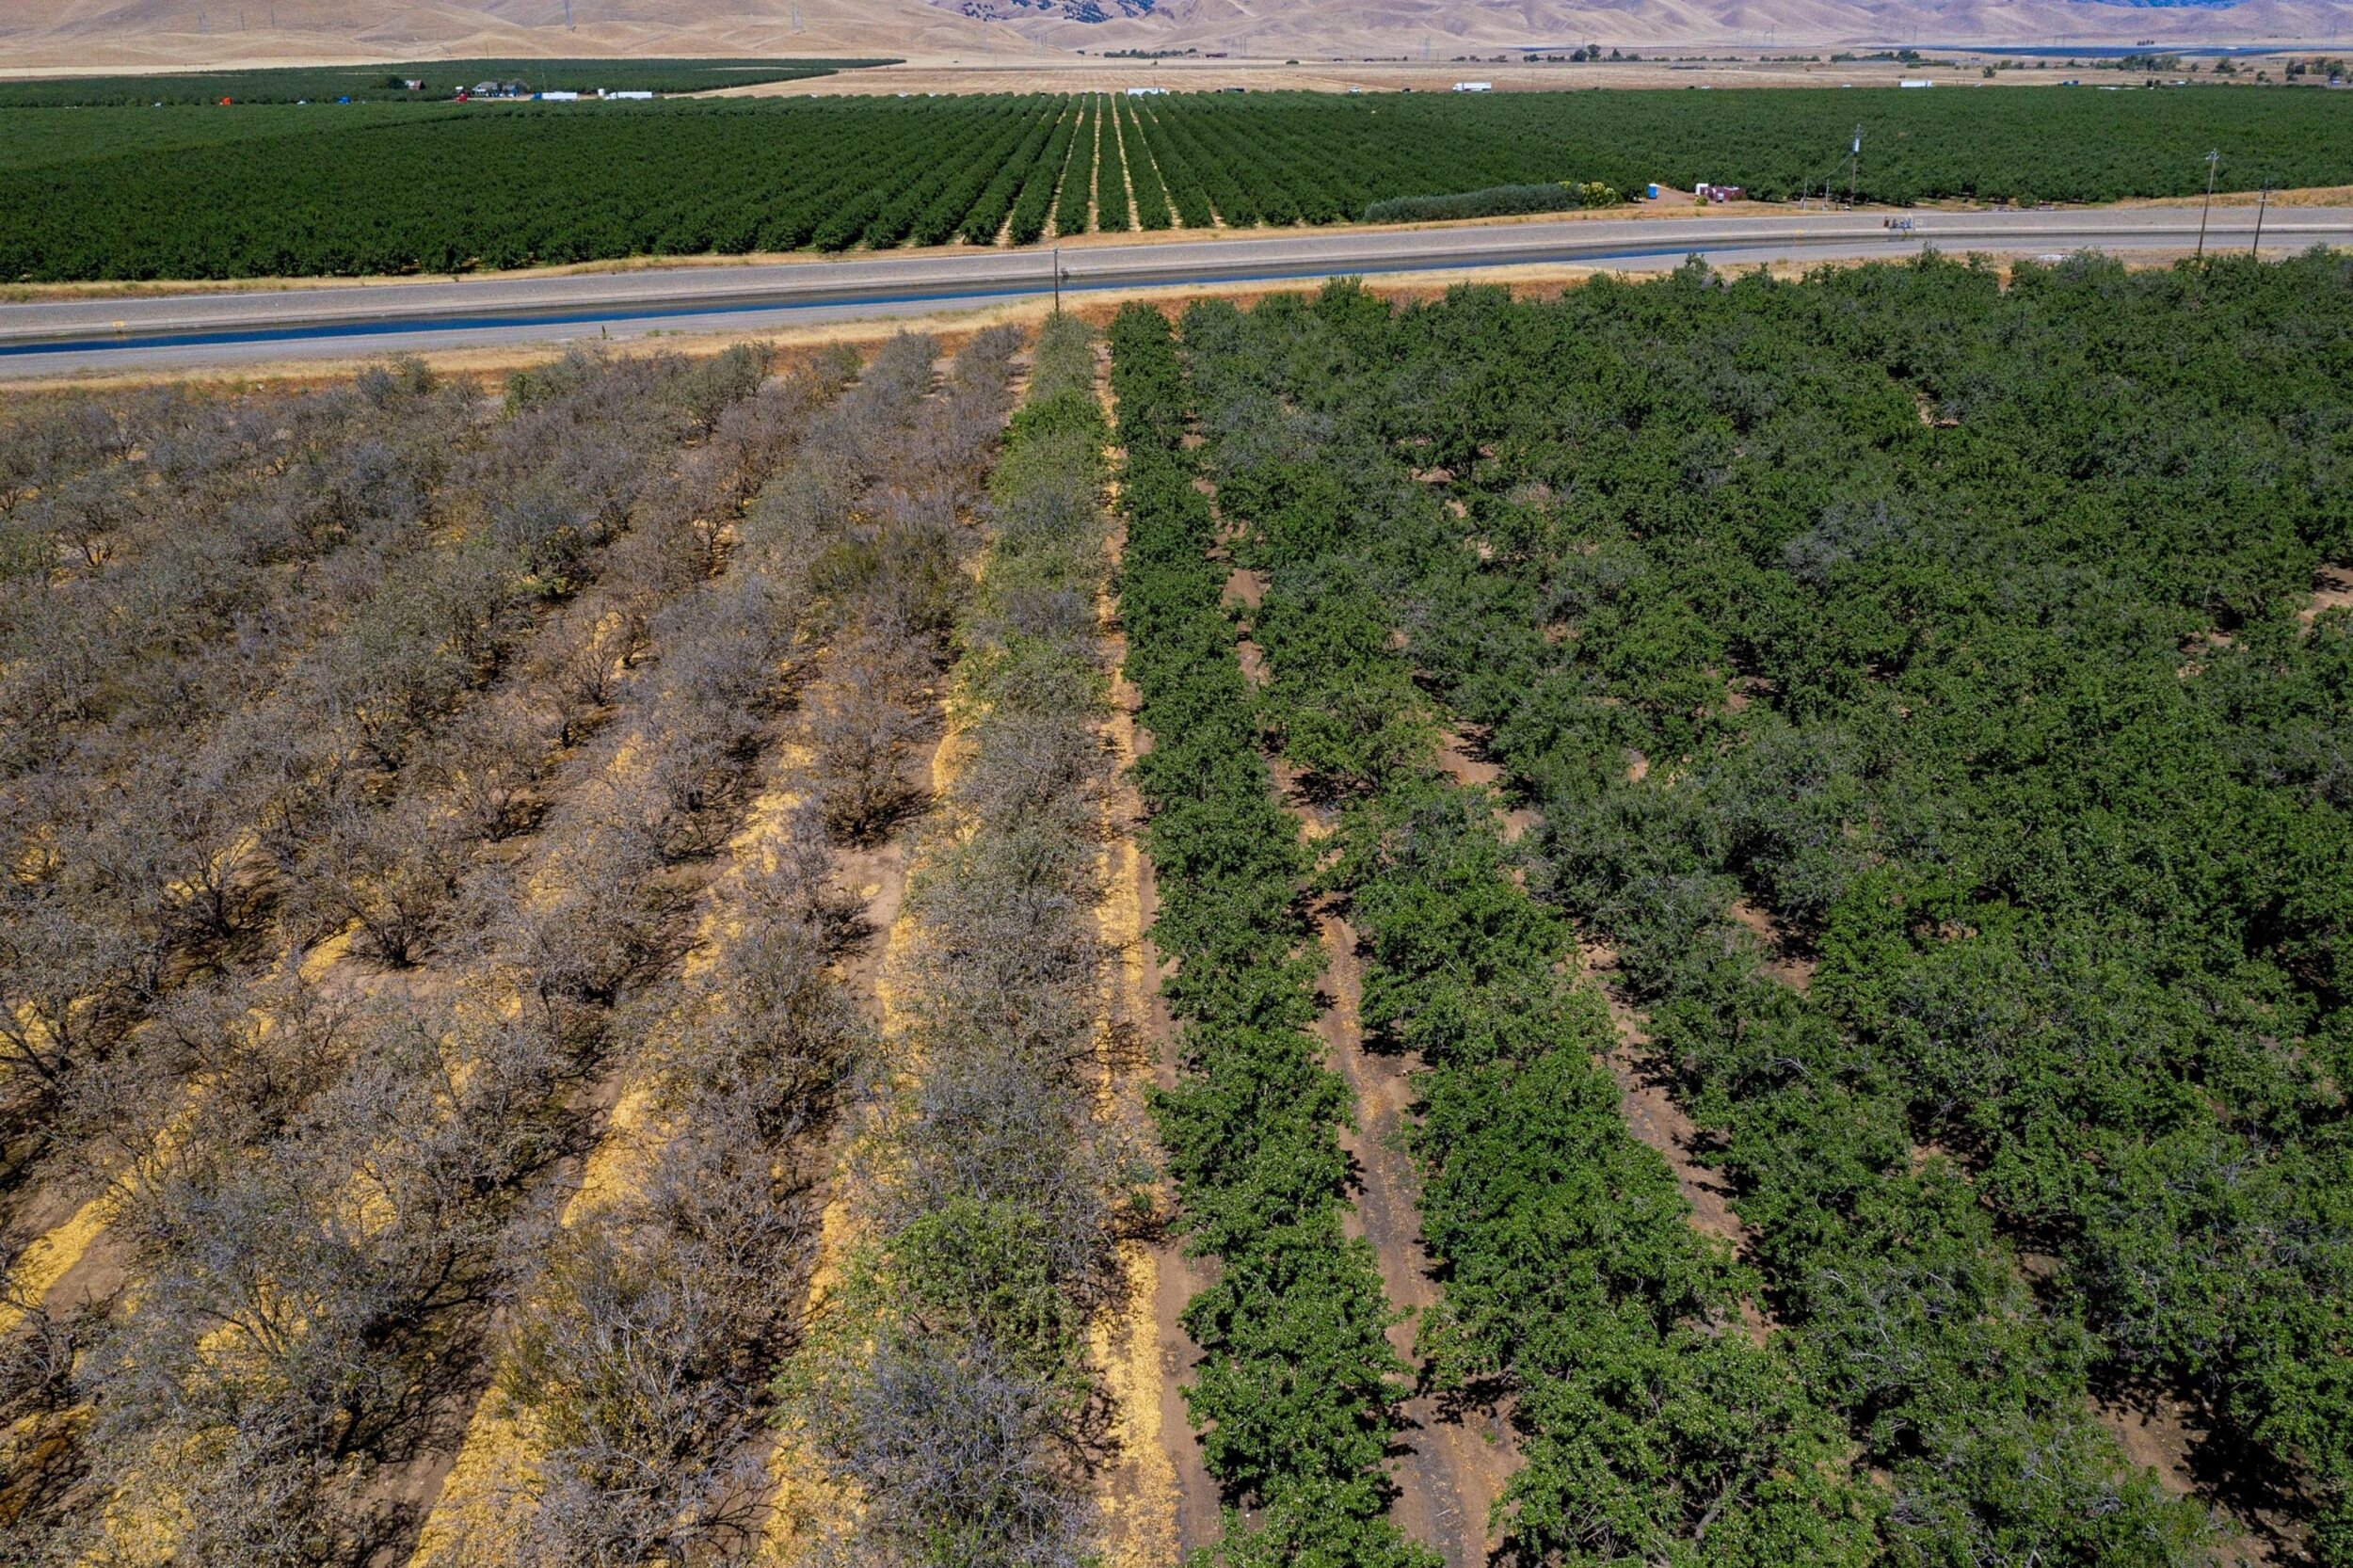 Water is so scarce on the Gemperle’s orchard in California’s Central Valley, they’ve been forced to let a third of their acreage go dry; Photographer: David Paul Morris/Bloomberg